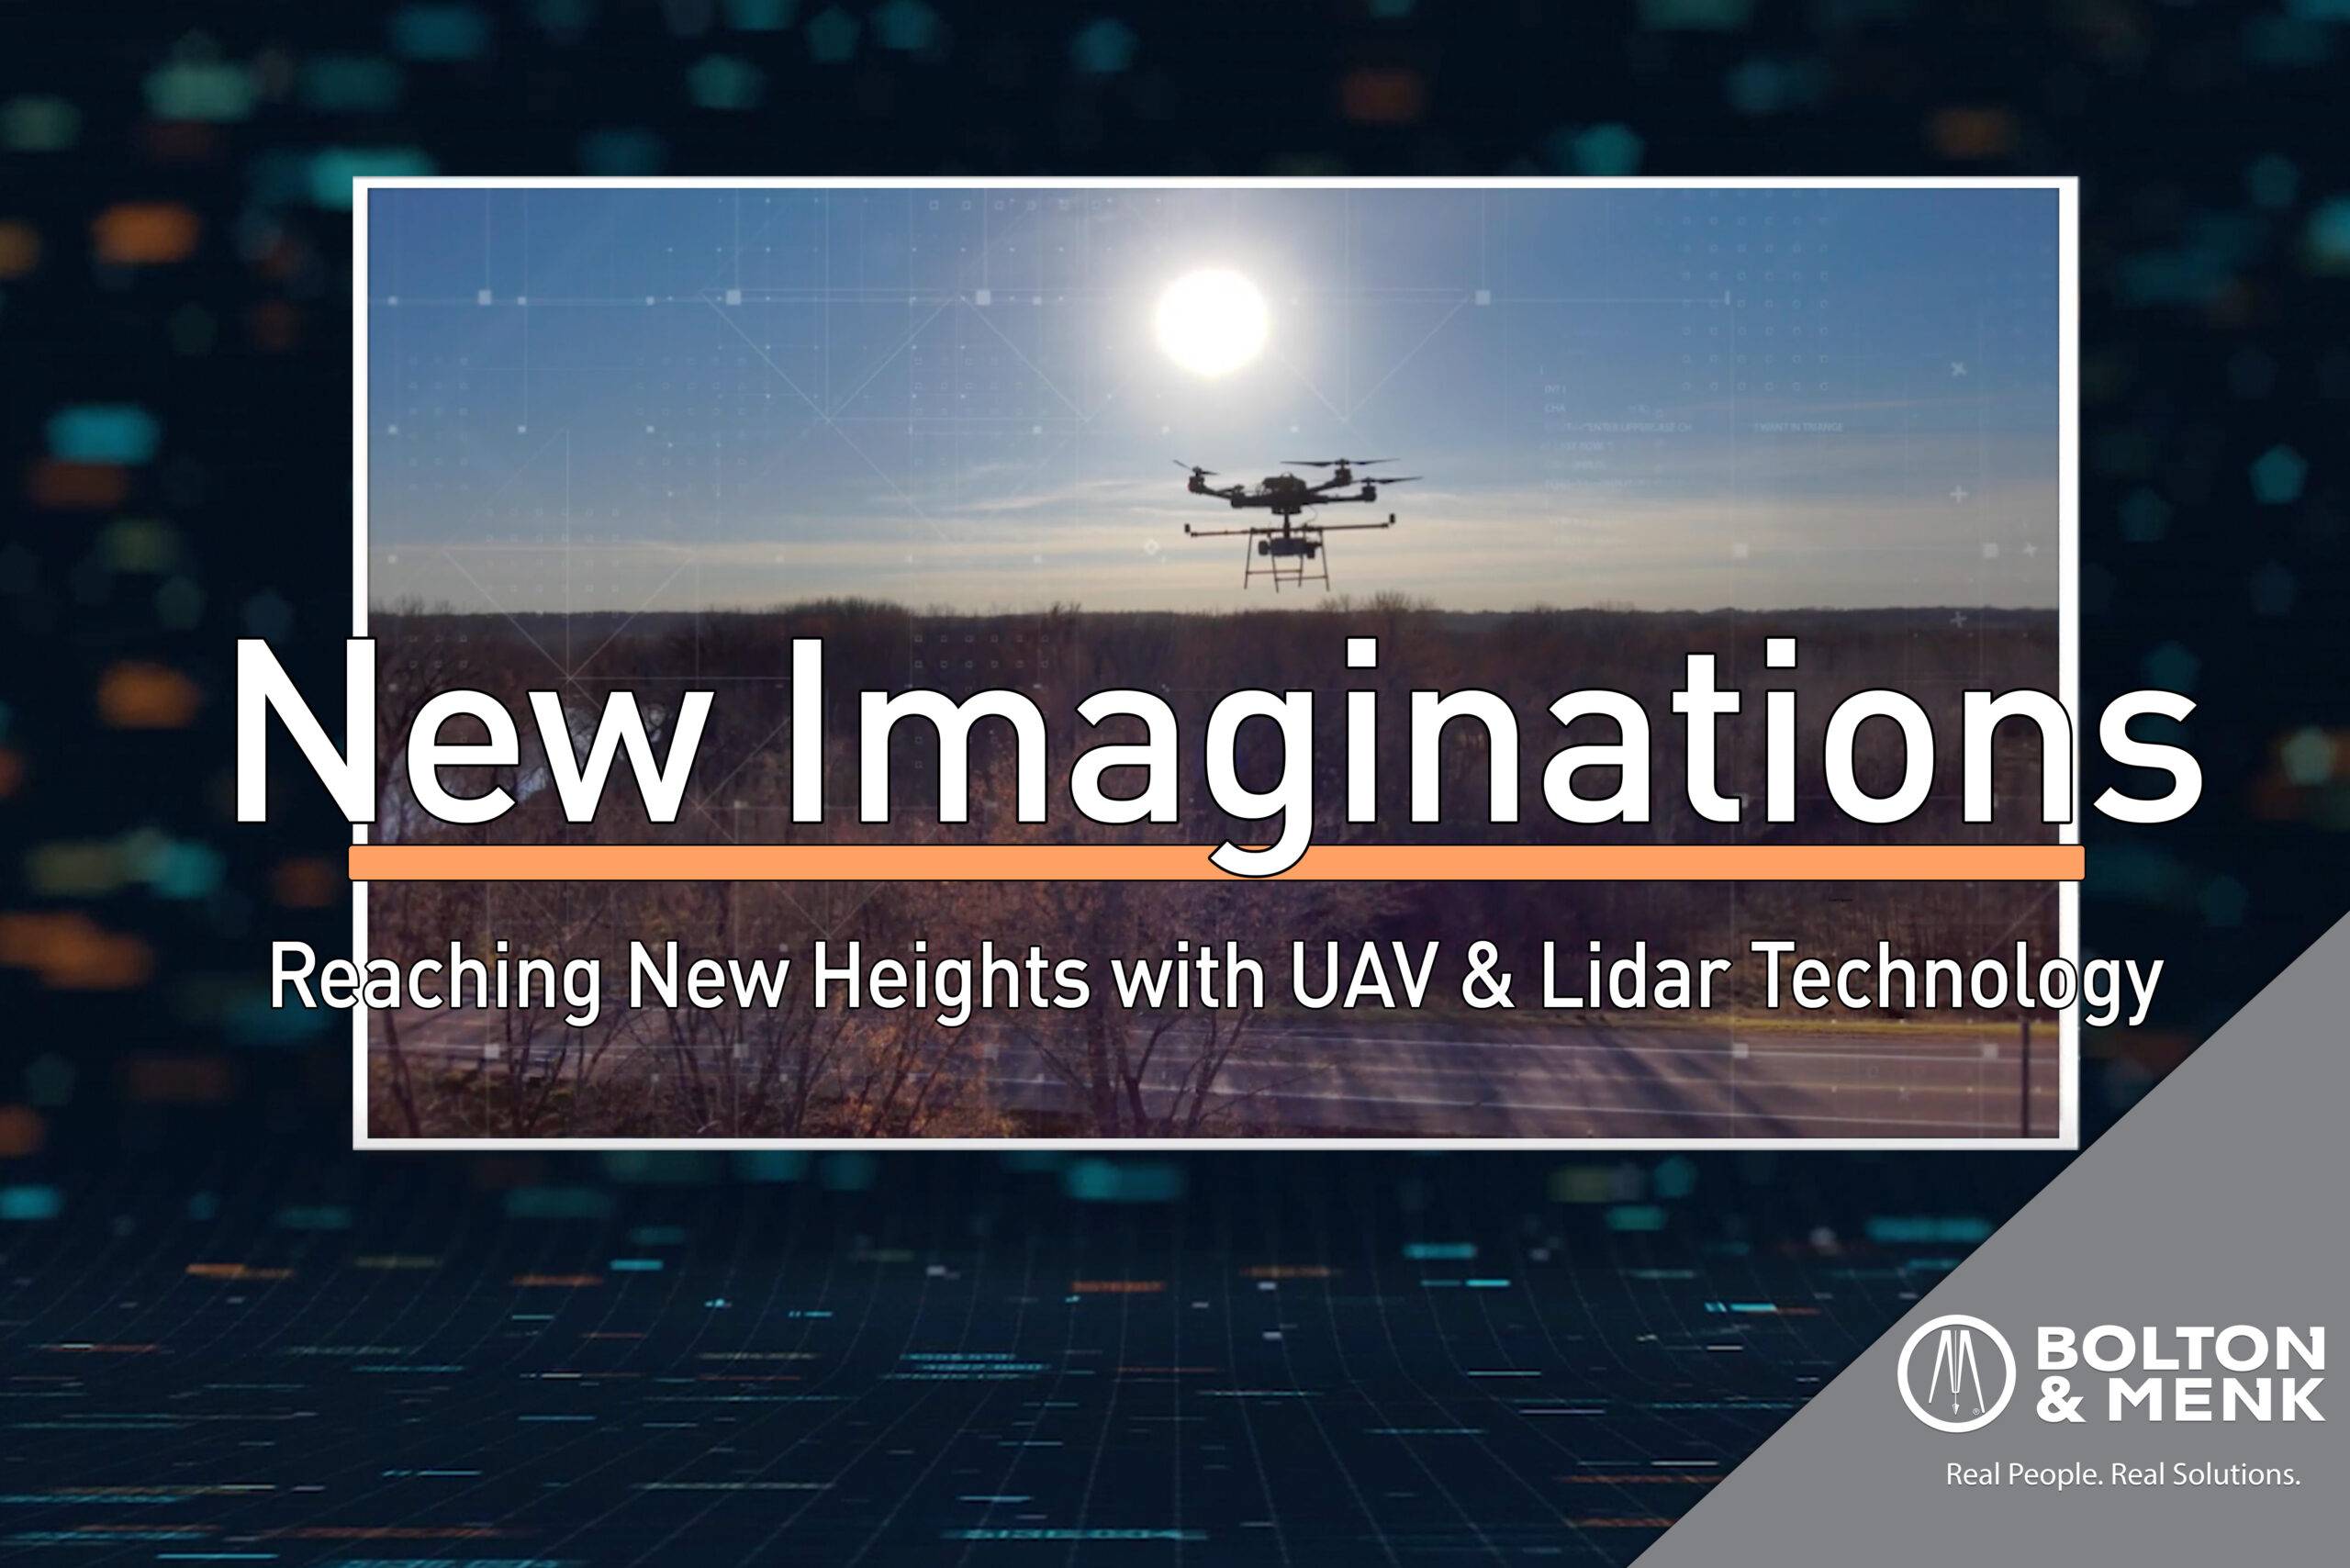 Reaching New Heights with UAV and LiDAR Technology